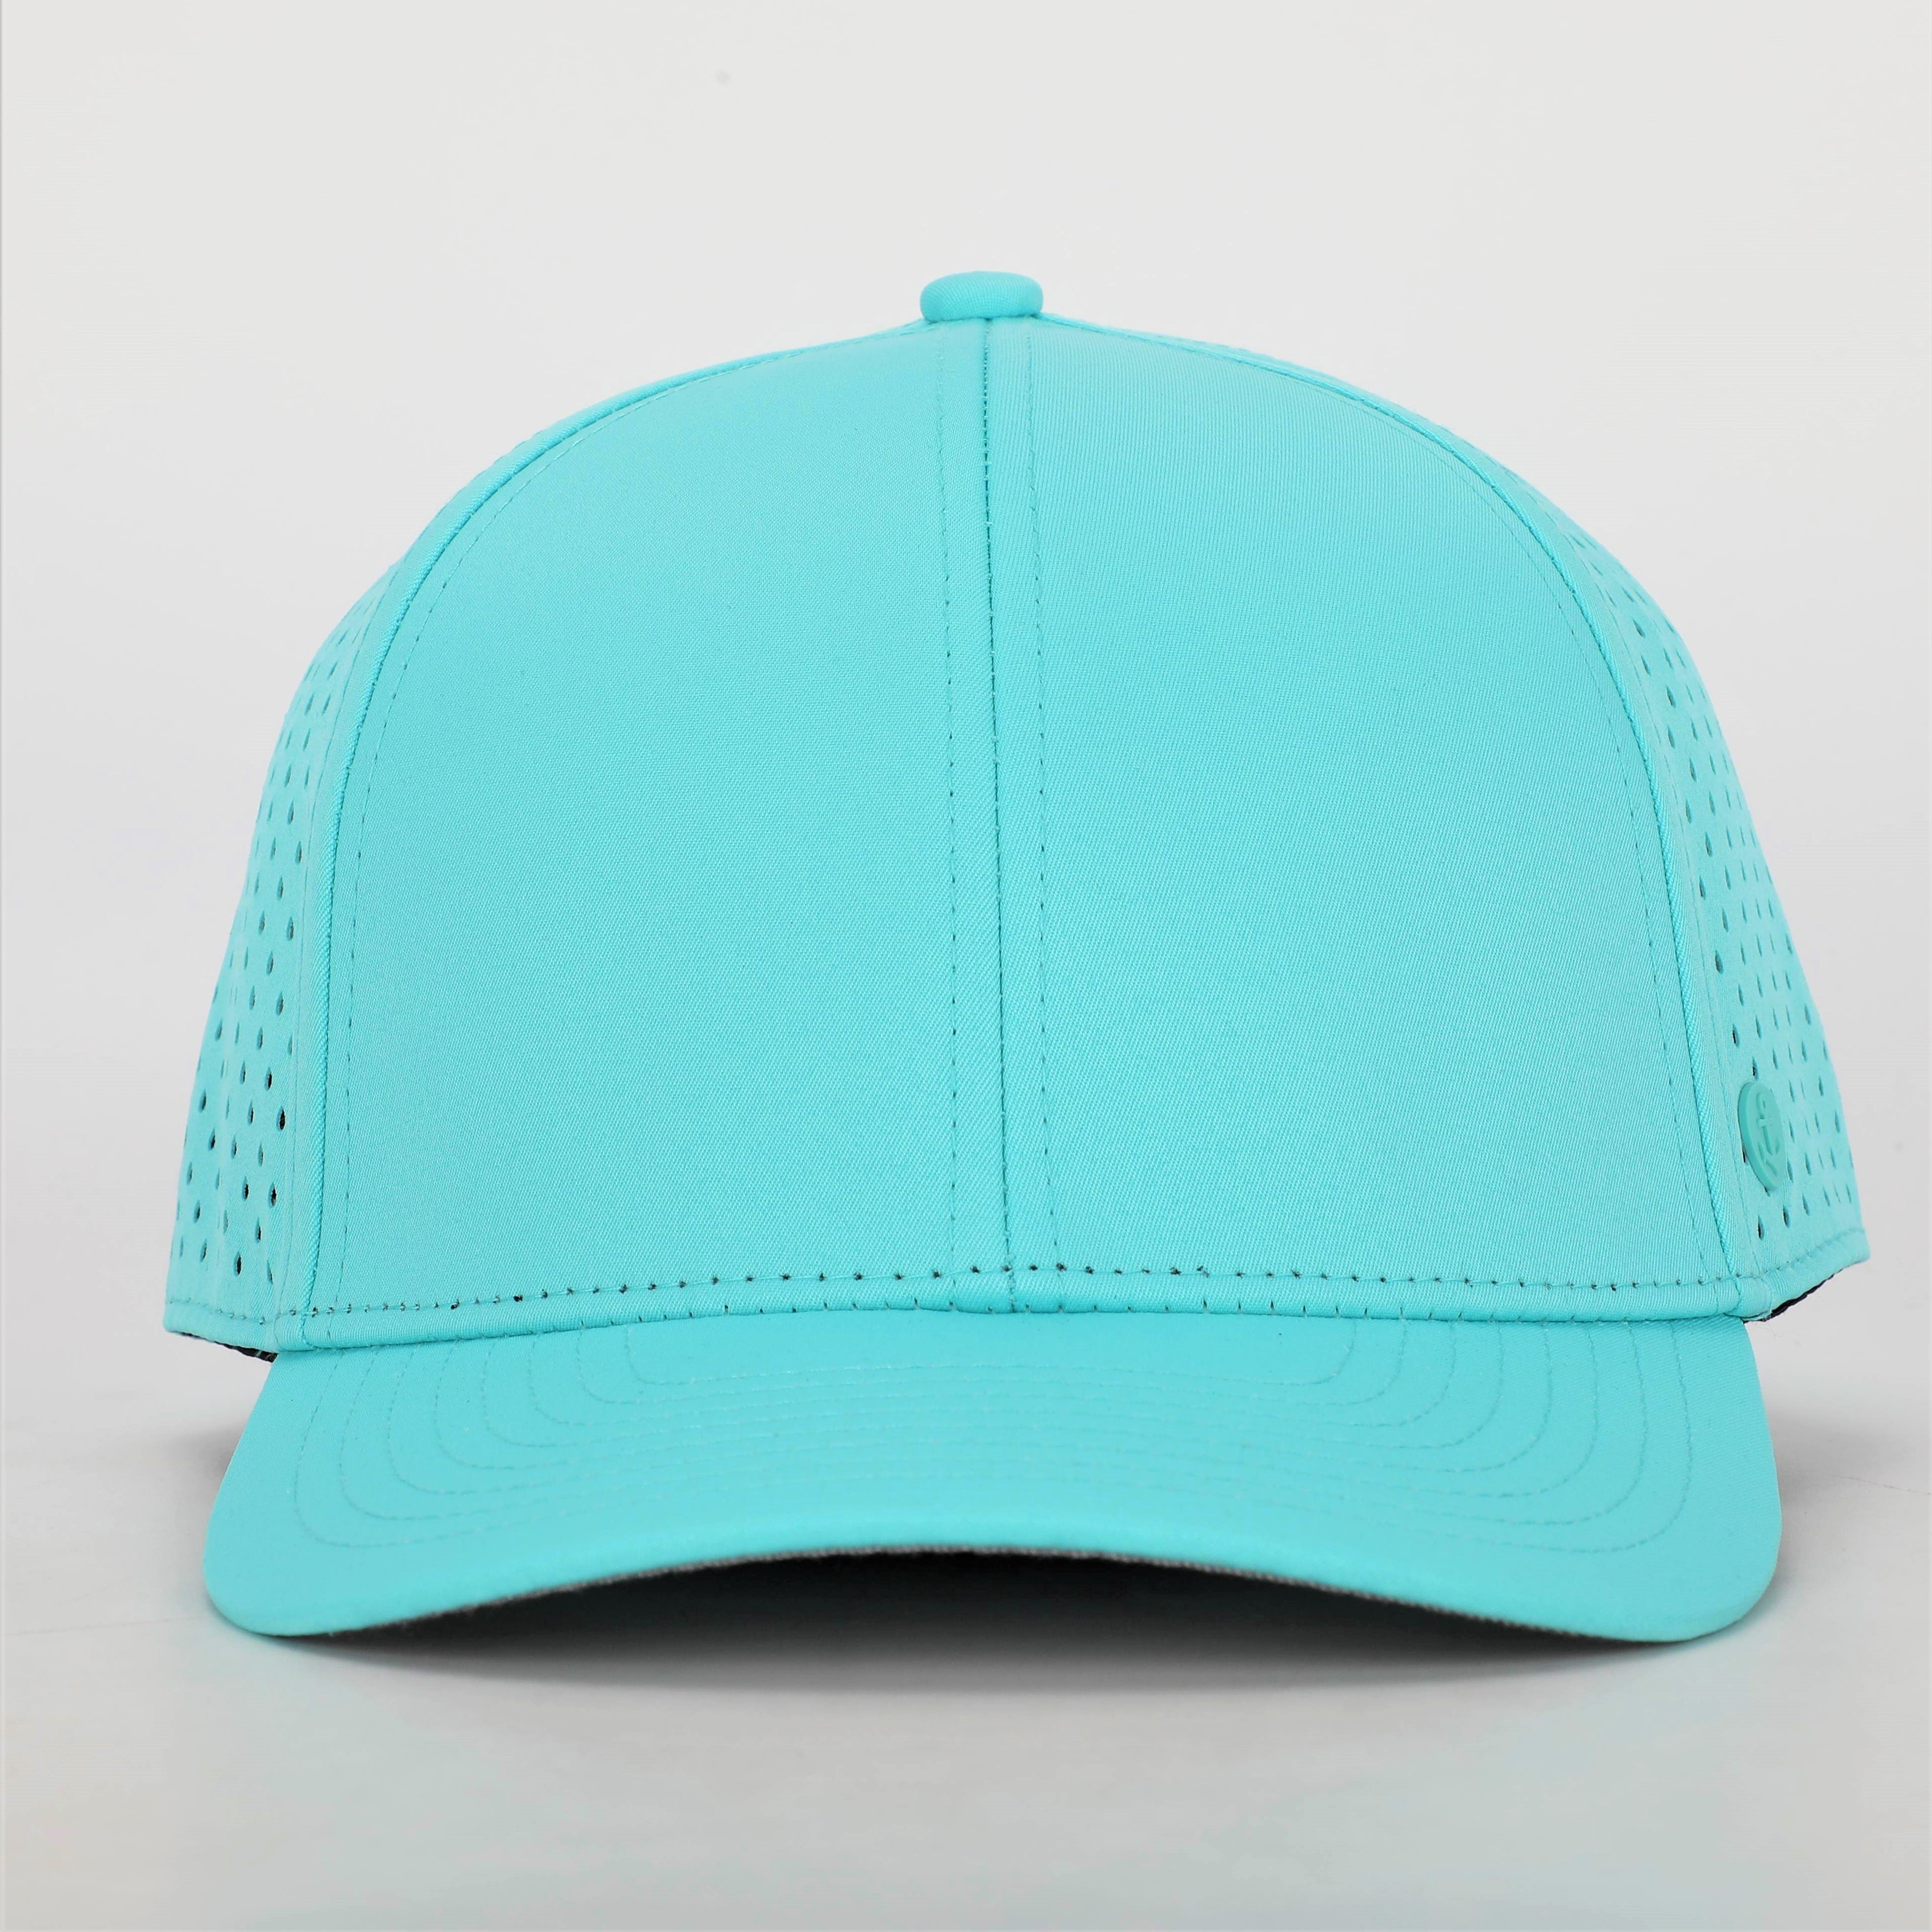 ANKOR Ultra Performance Water-Resistant UPF 50 Baseball Hat | Golf | Boat | Beach | Lake | Workout | Everyday | Men and Women